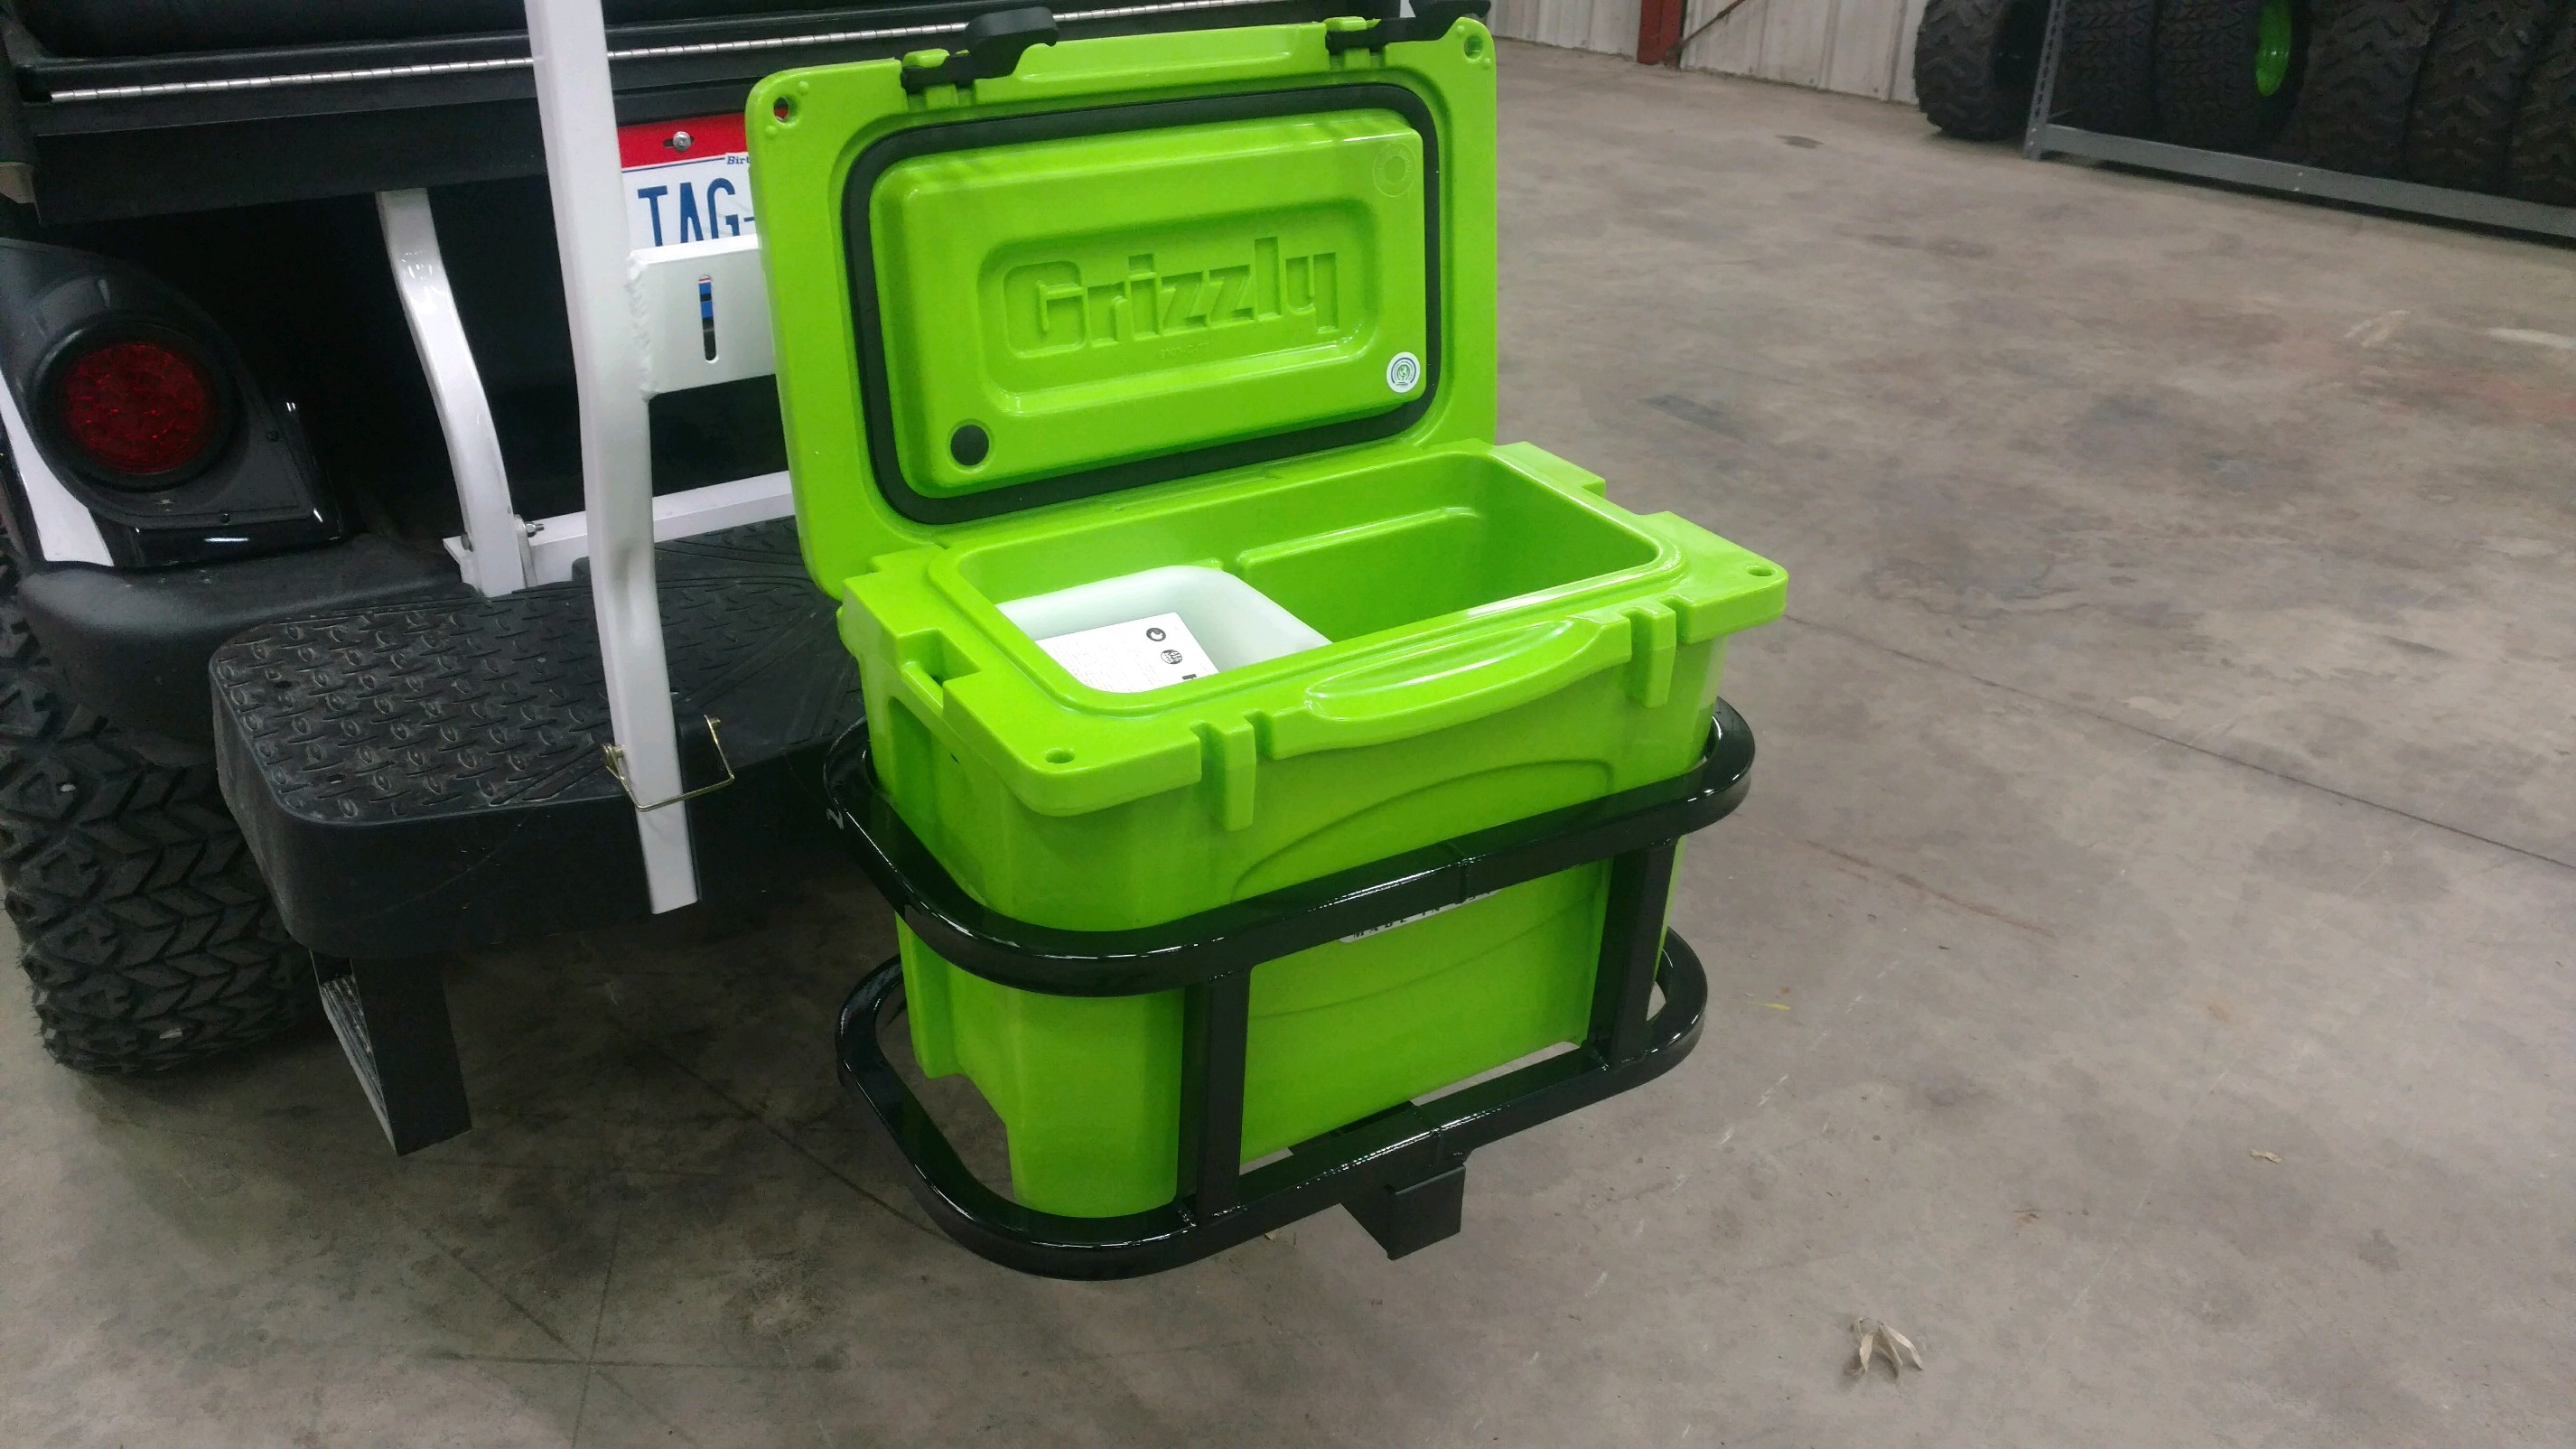 Grizzly 15 Hitch Cooler Carrier